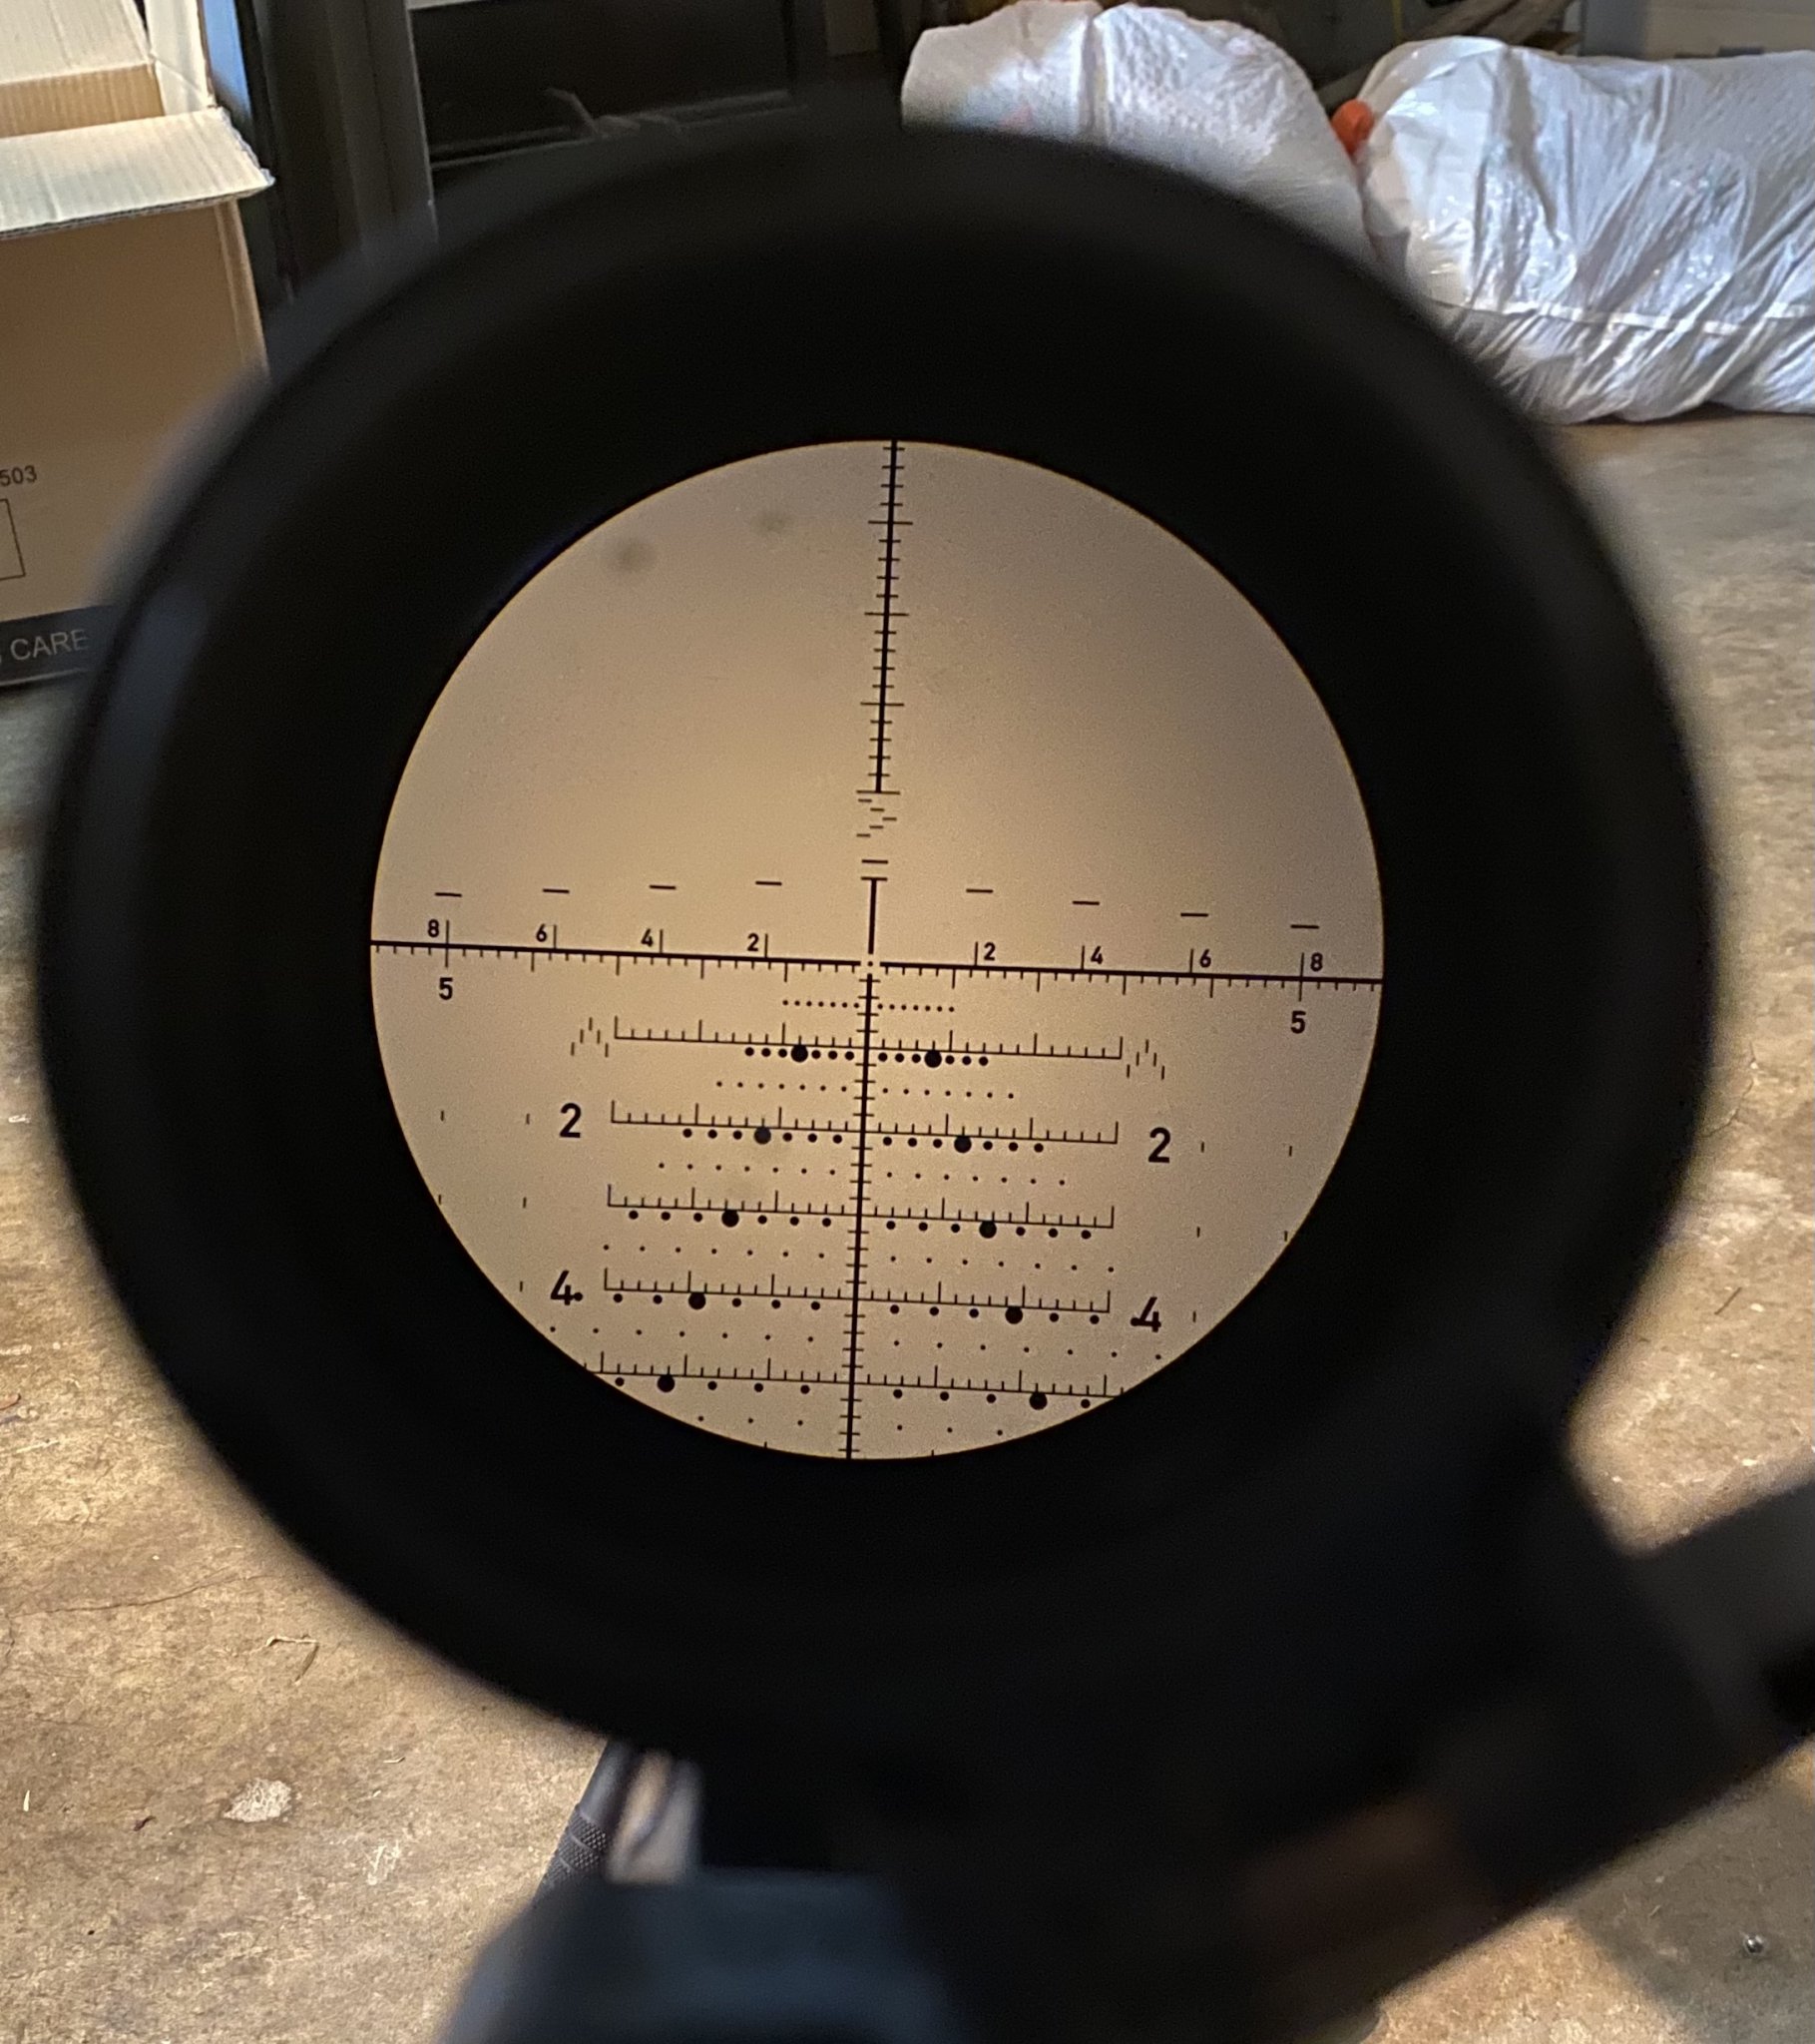 Optics Wts Nightforce Atacr F With T Reticle With Spuhr Mount